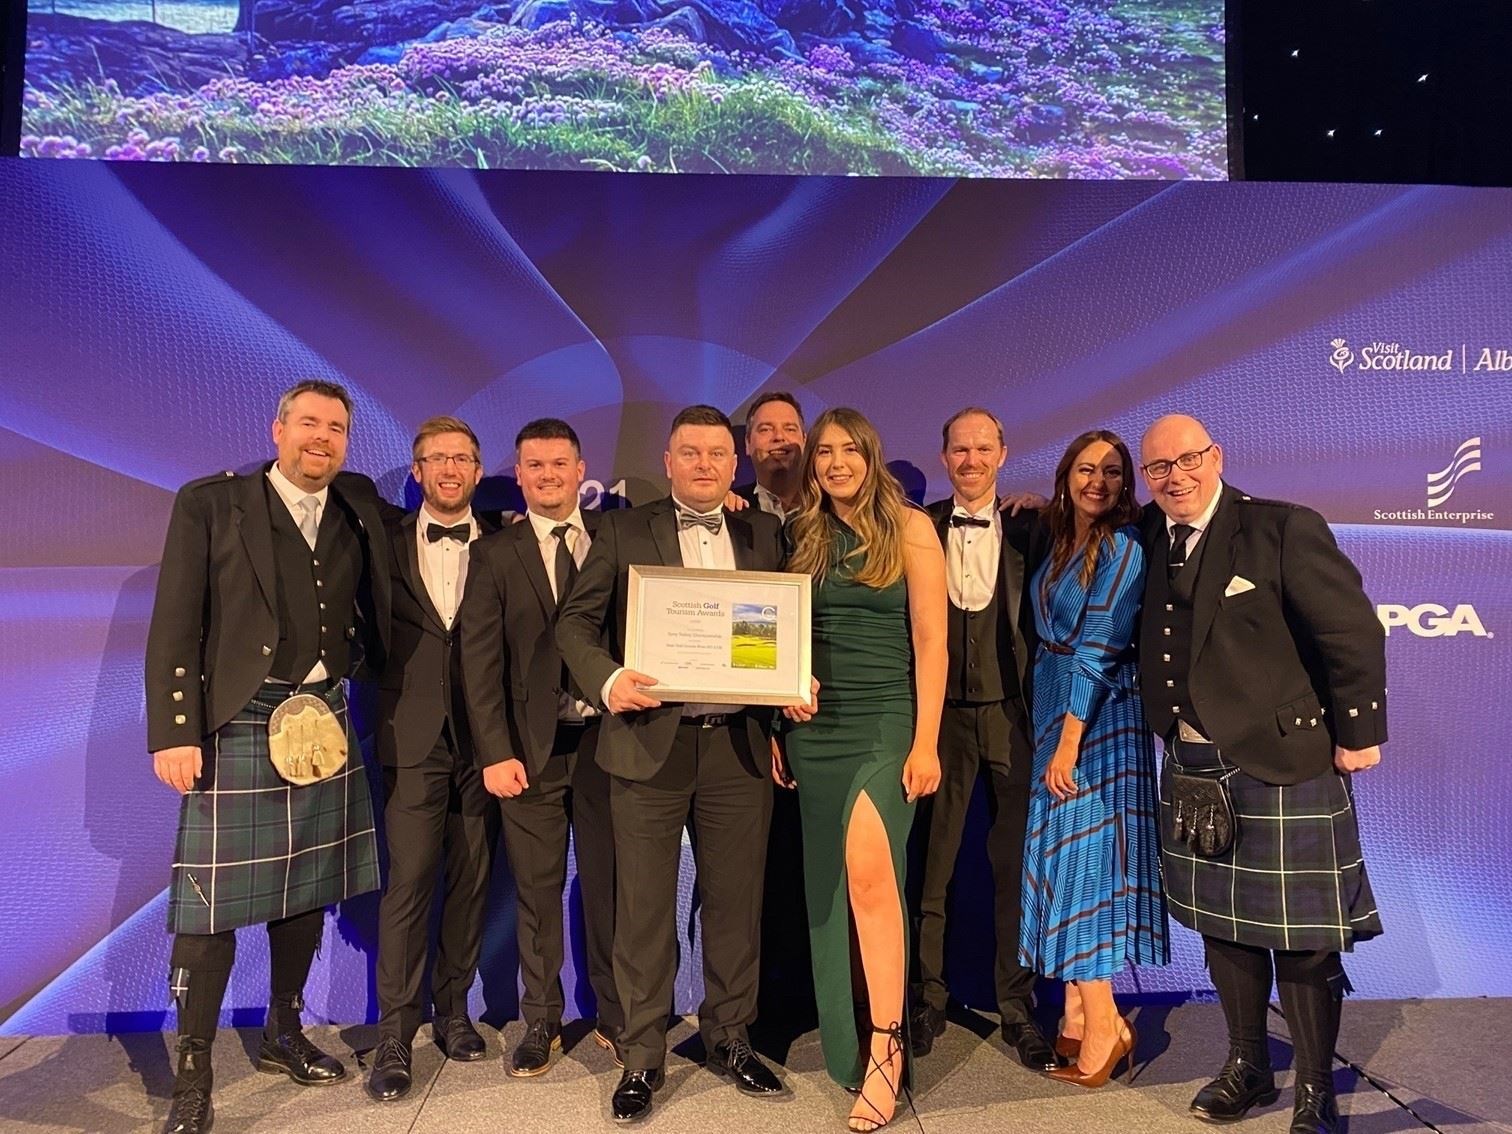 David MacMullen, director of golf at Macdonald Hotels and Resorts, with the award, along with staff and the hosts of the awards.